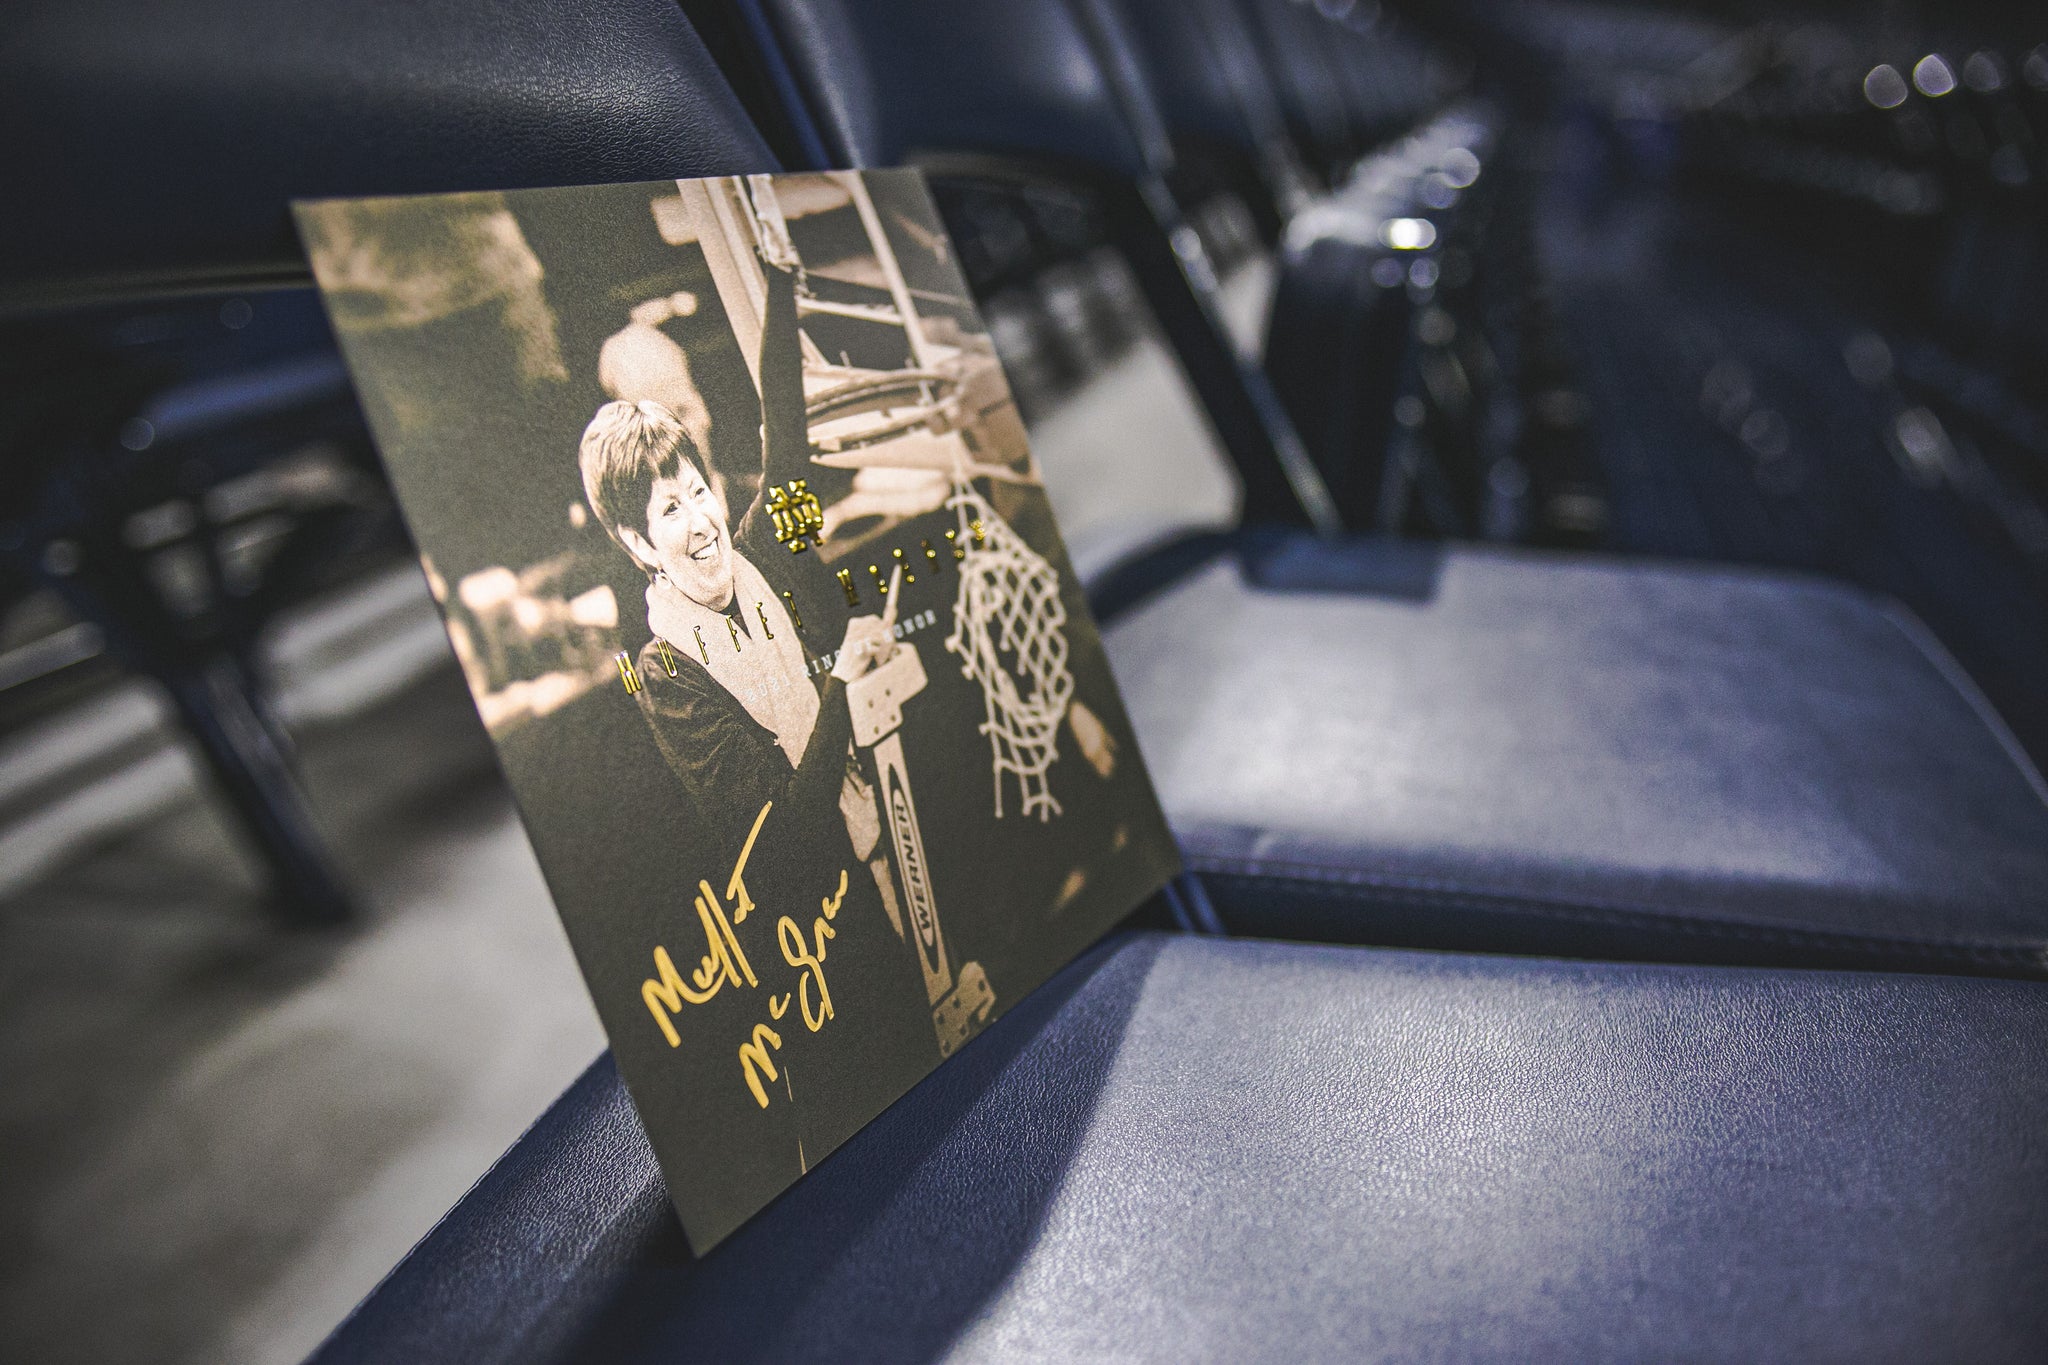 Coach Muffet McGraw Ring of Honor Package